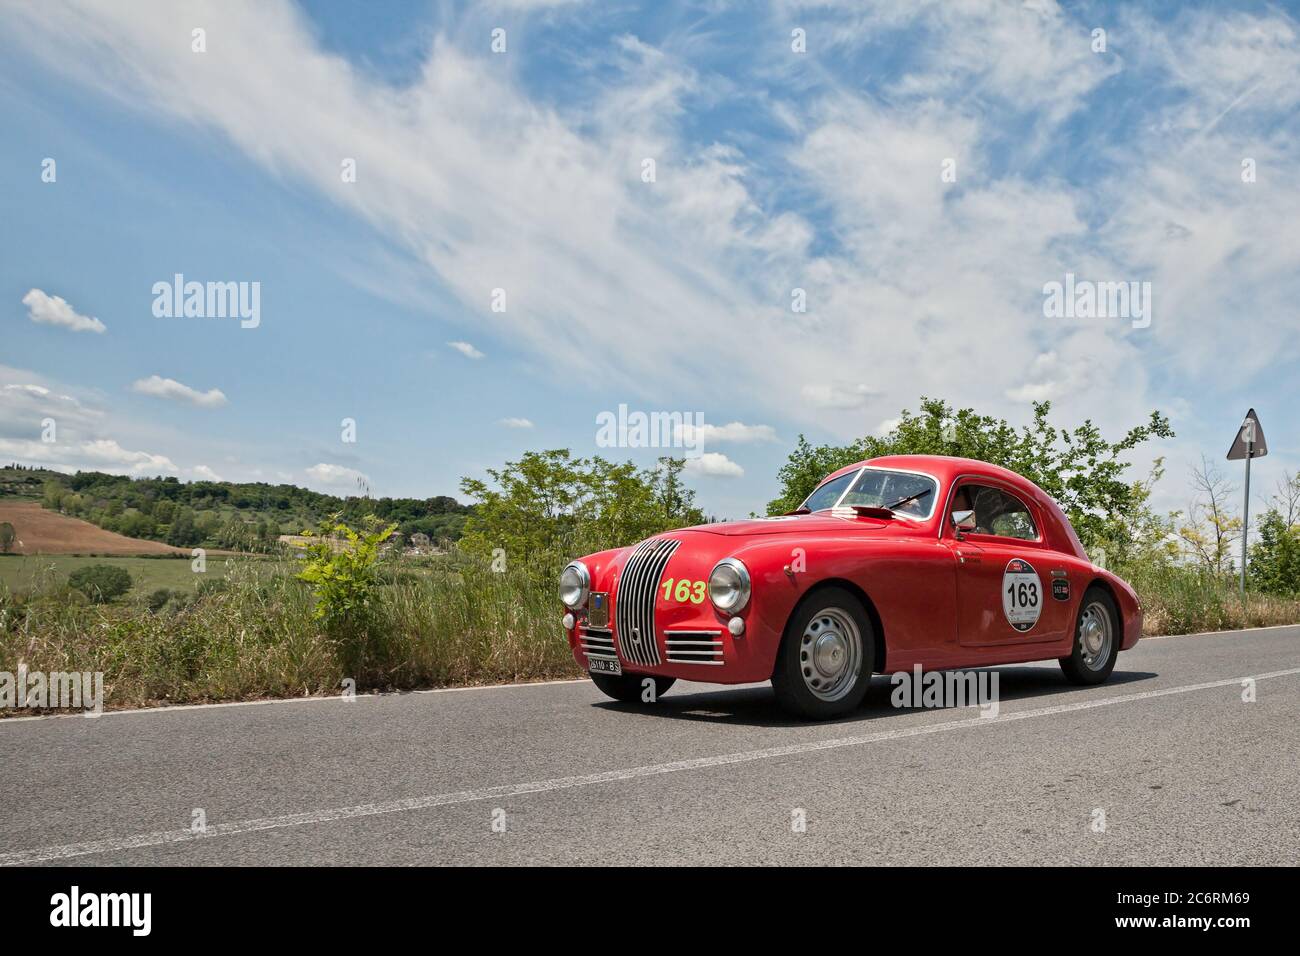 Vintage Fiat 1100 S Berlinetta 'Gobbone' (1948) in classic car race Mille Miglia, on May 17, 2014 in Colle di Val d'Elsa, Tuscany, Italy Stock Photo